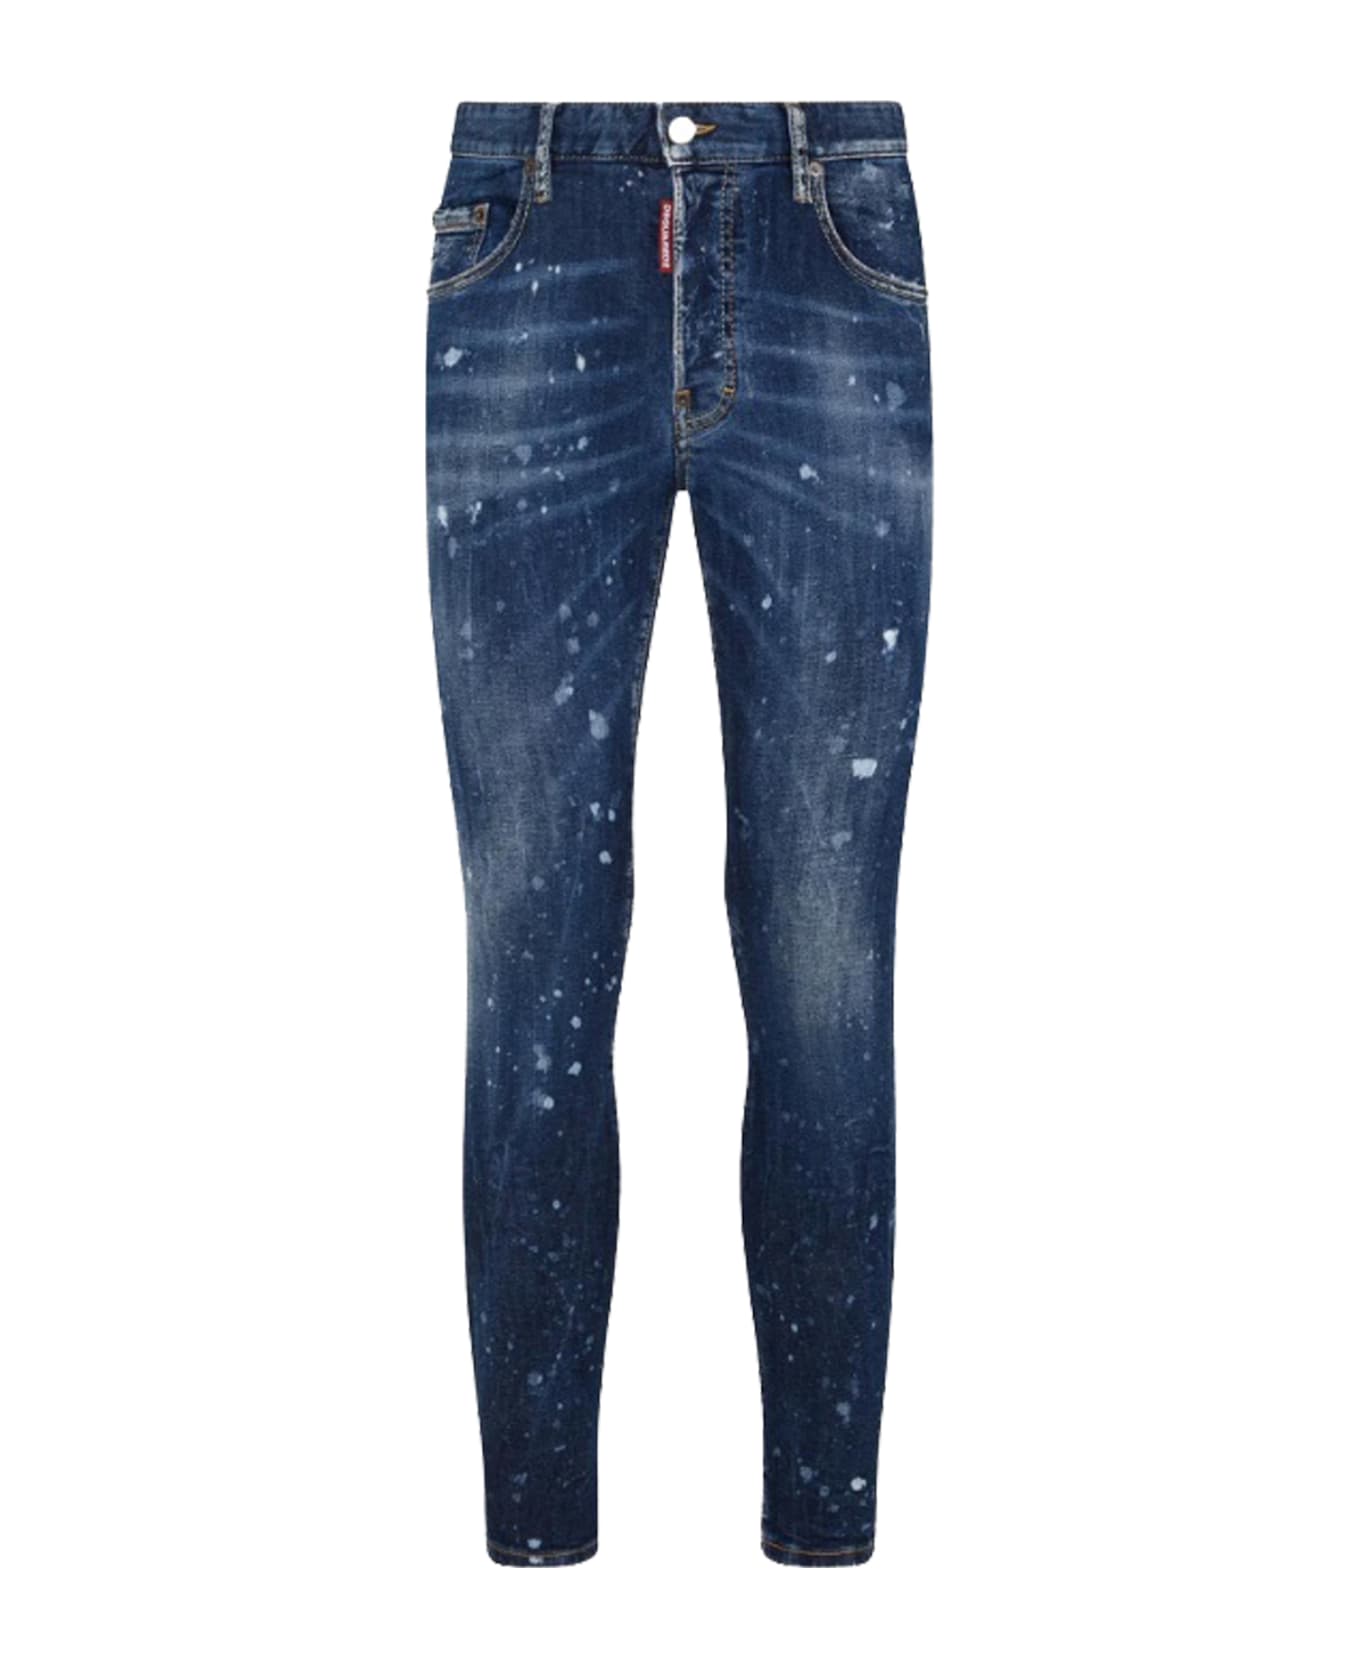 Dsquared2 Jeans - Navy blue